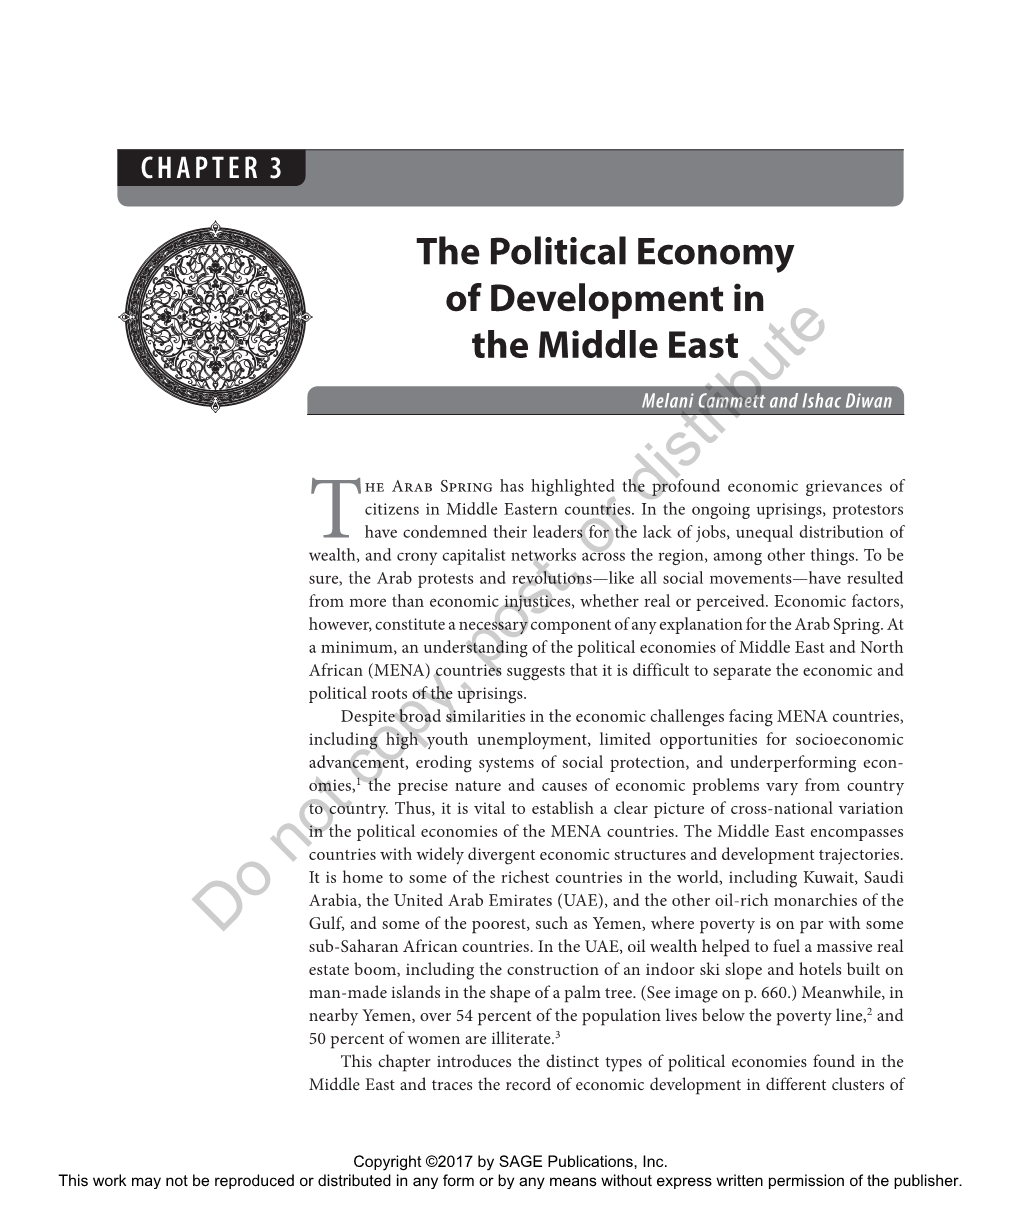 The Political Economy of Development in the Middle East